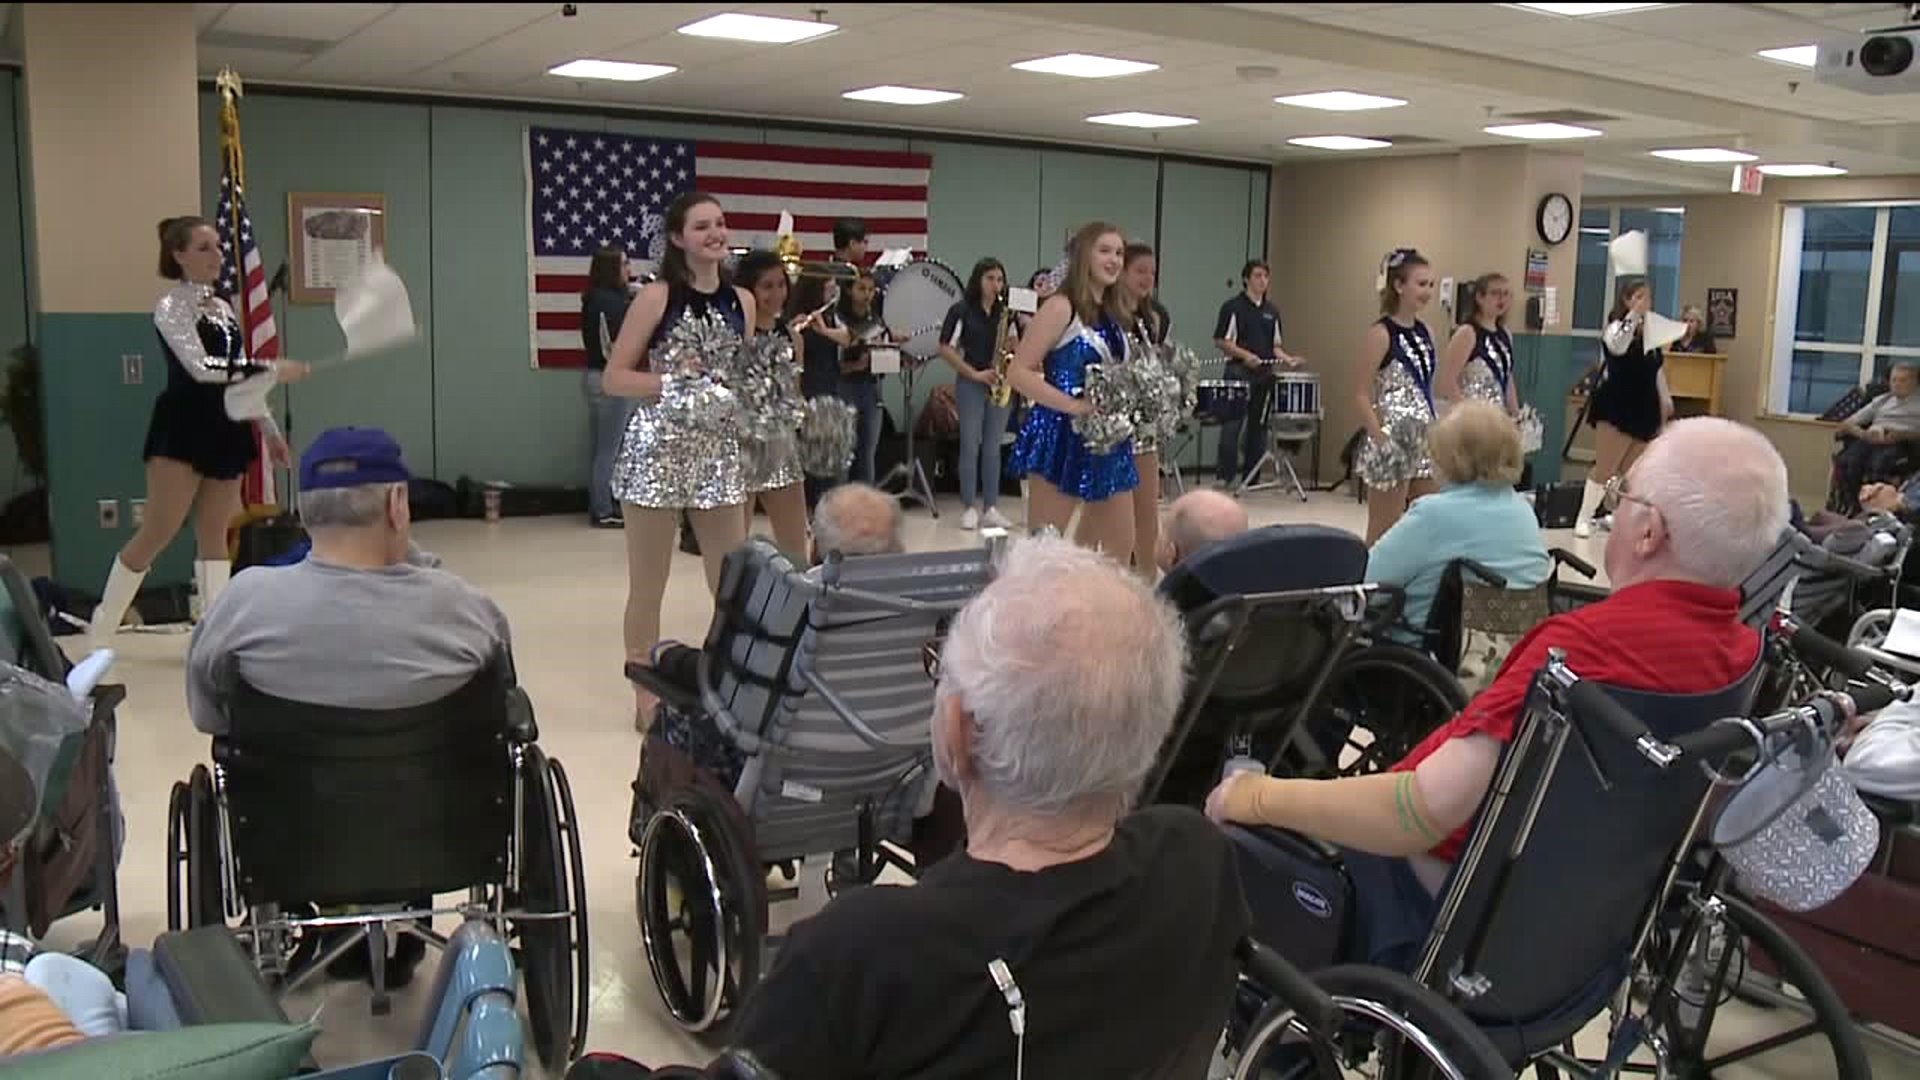 Abington Heights Band, Dancers Perform for Veterans at Gino Merli Center